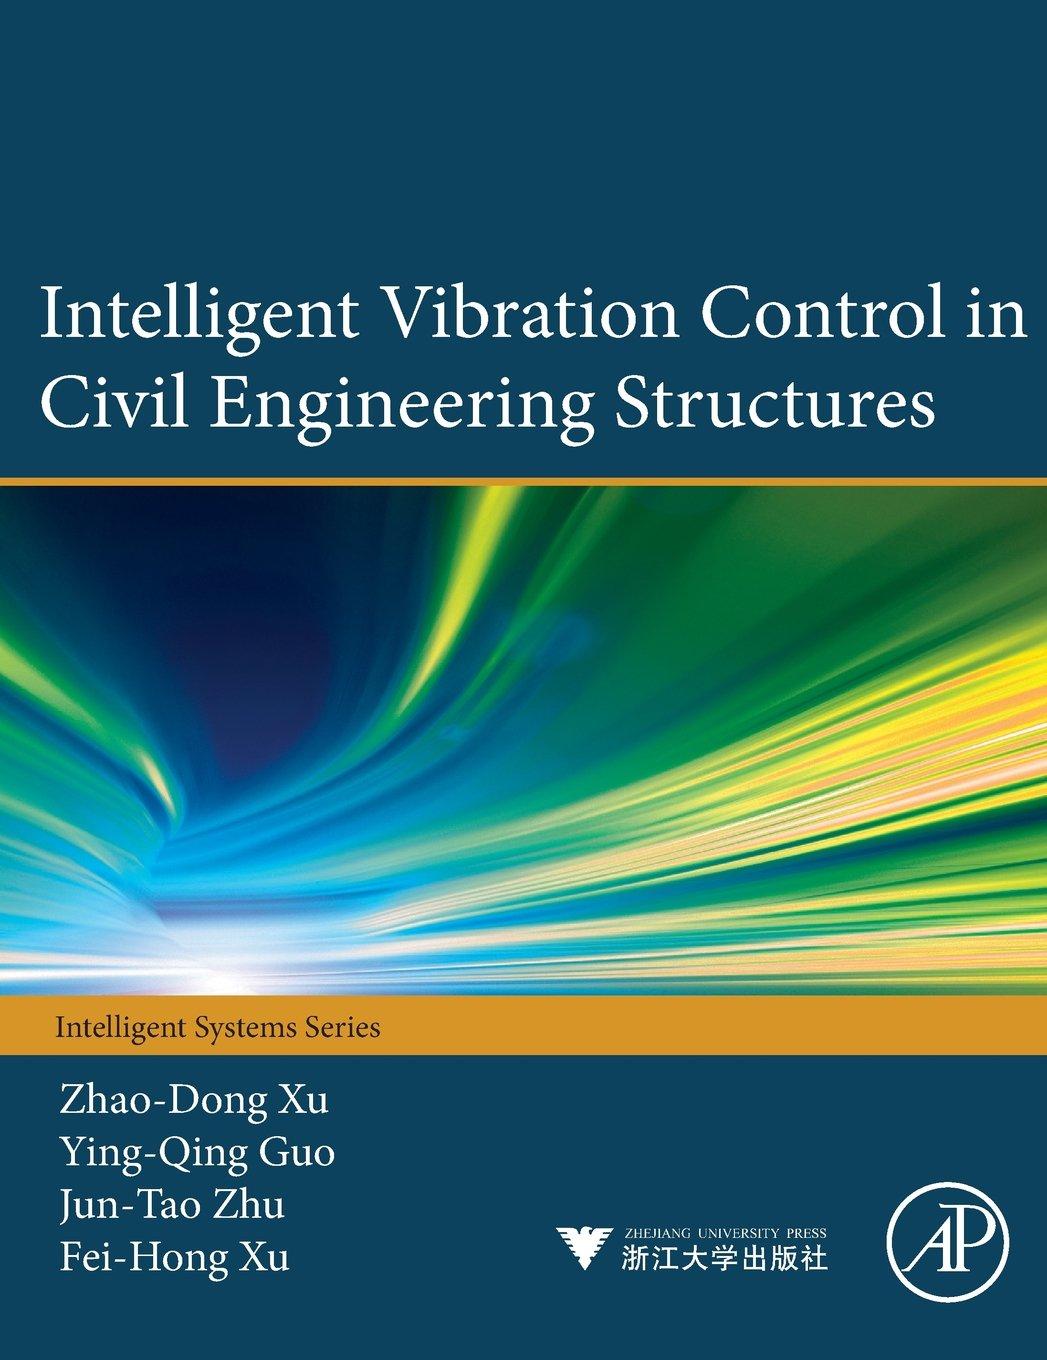 intelligent vibration control in civil engineering structures 1st edition zhao-dong xu, ying-qing guo,